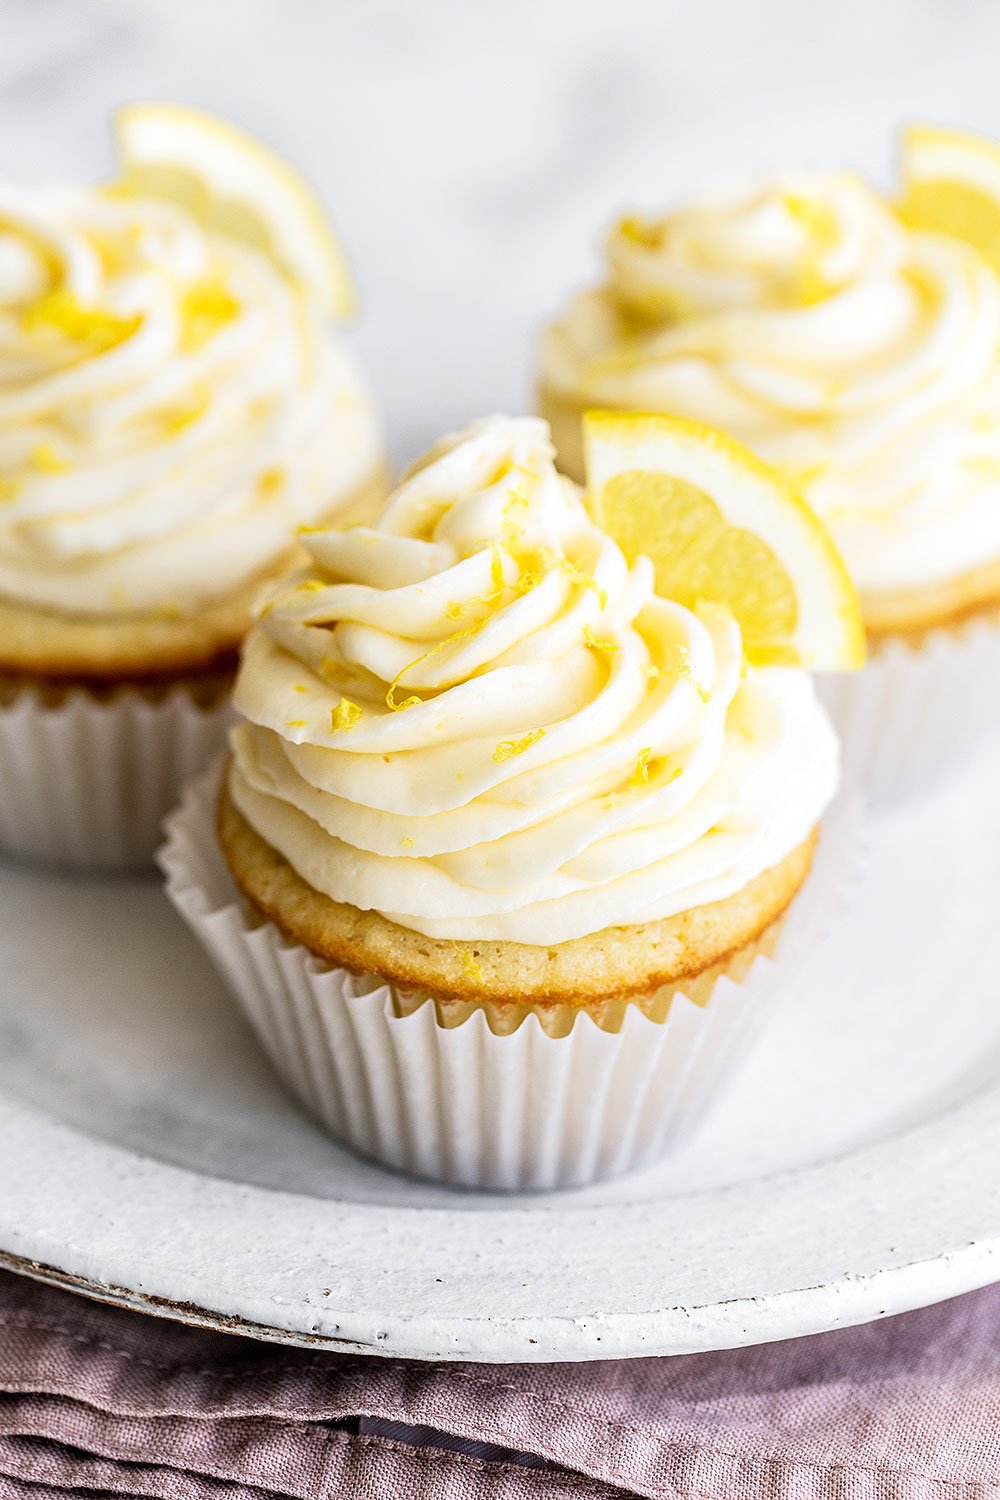 three lemon cupcakes on a plate - easy to serve!